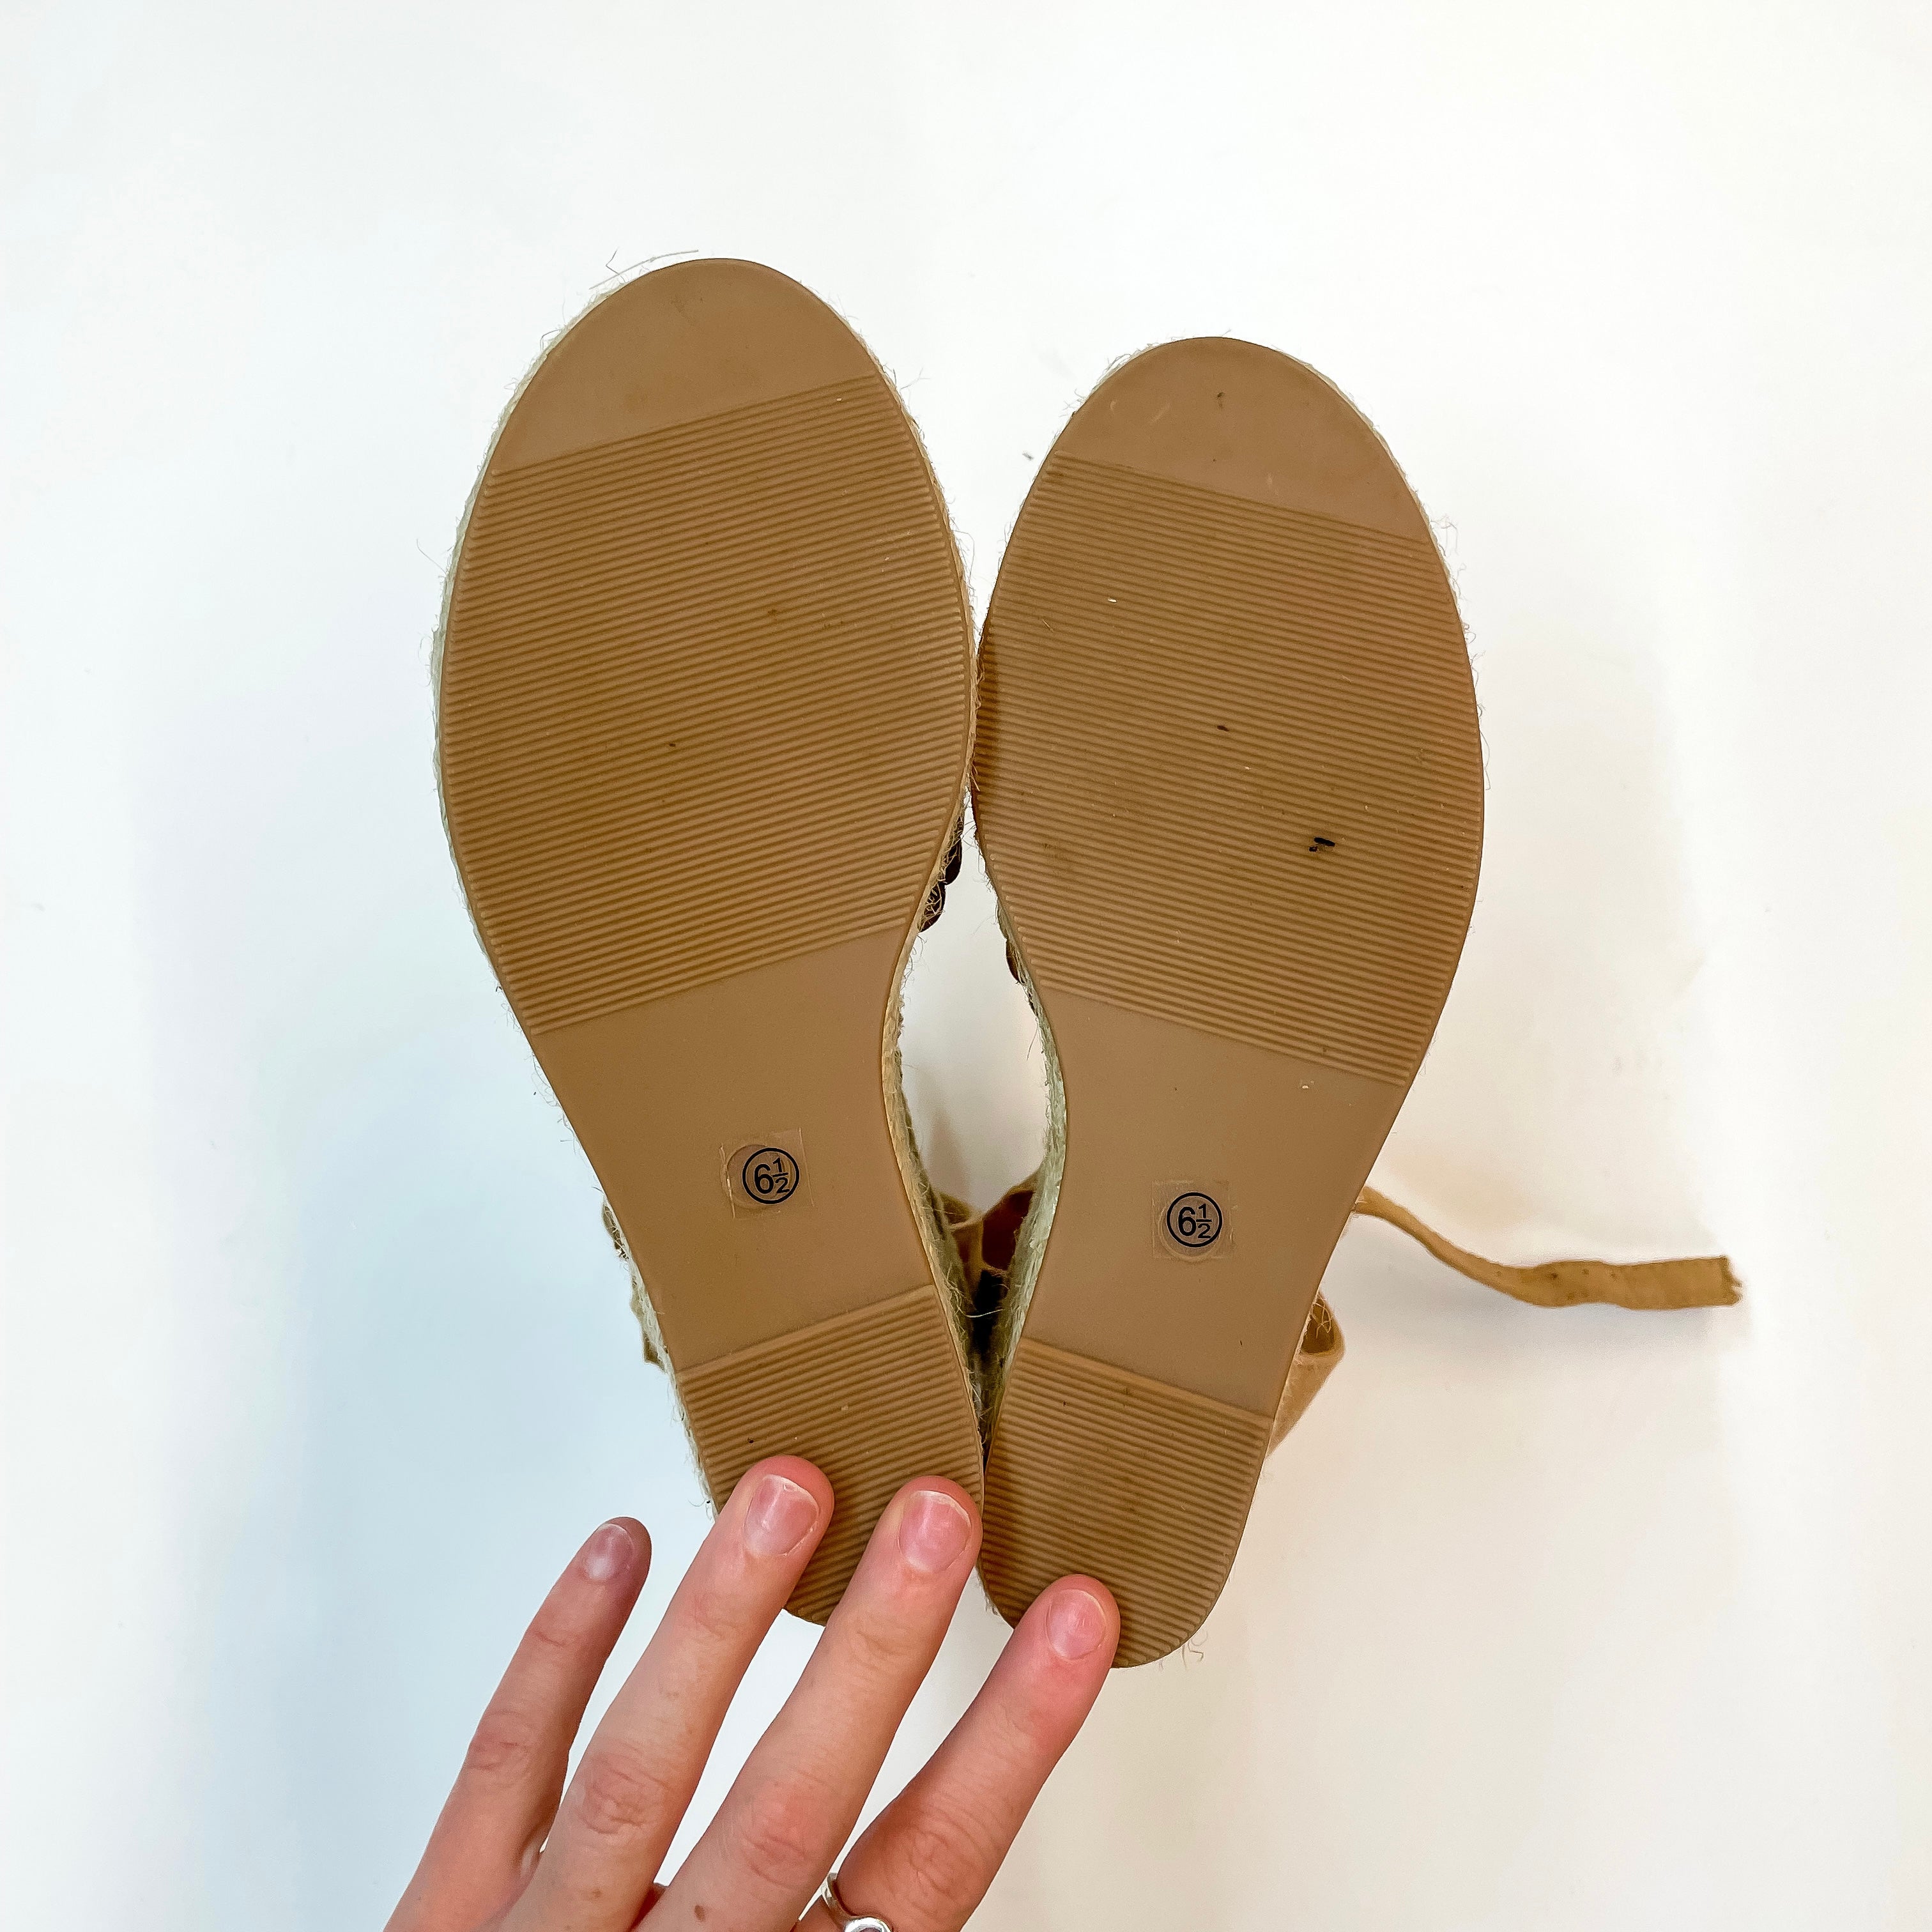 Model Shoe Size 6.5 | Passing through Paradise Espadrille Wedges in Tan - Giddy Up Glamour Boutique